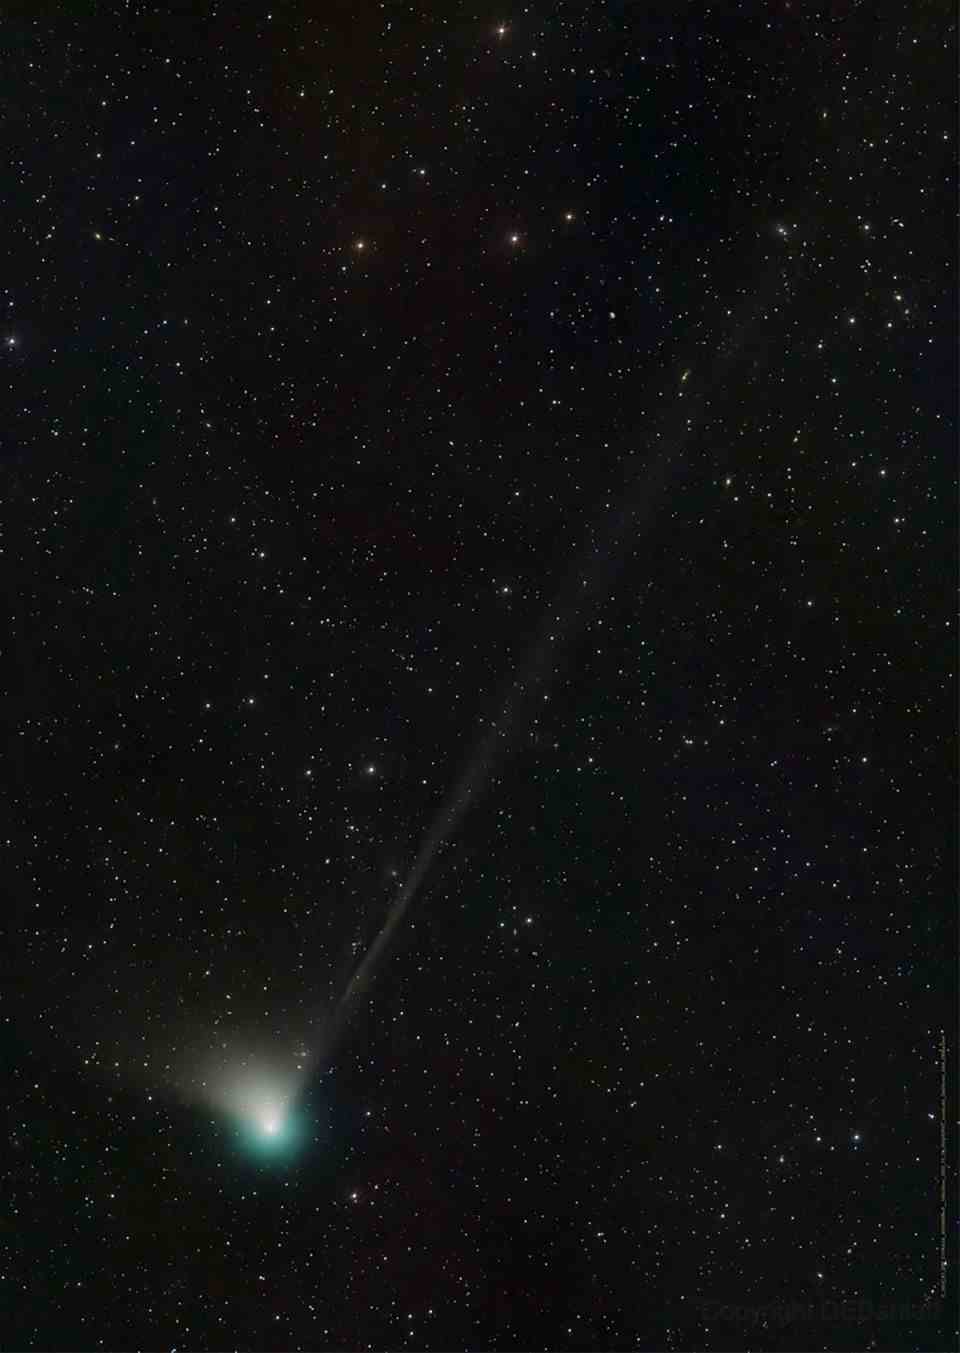 Another shot of the rare comet.